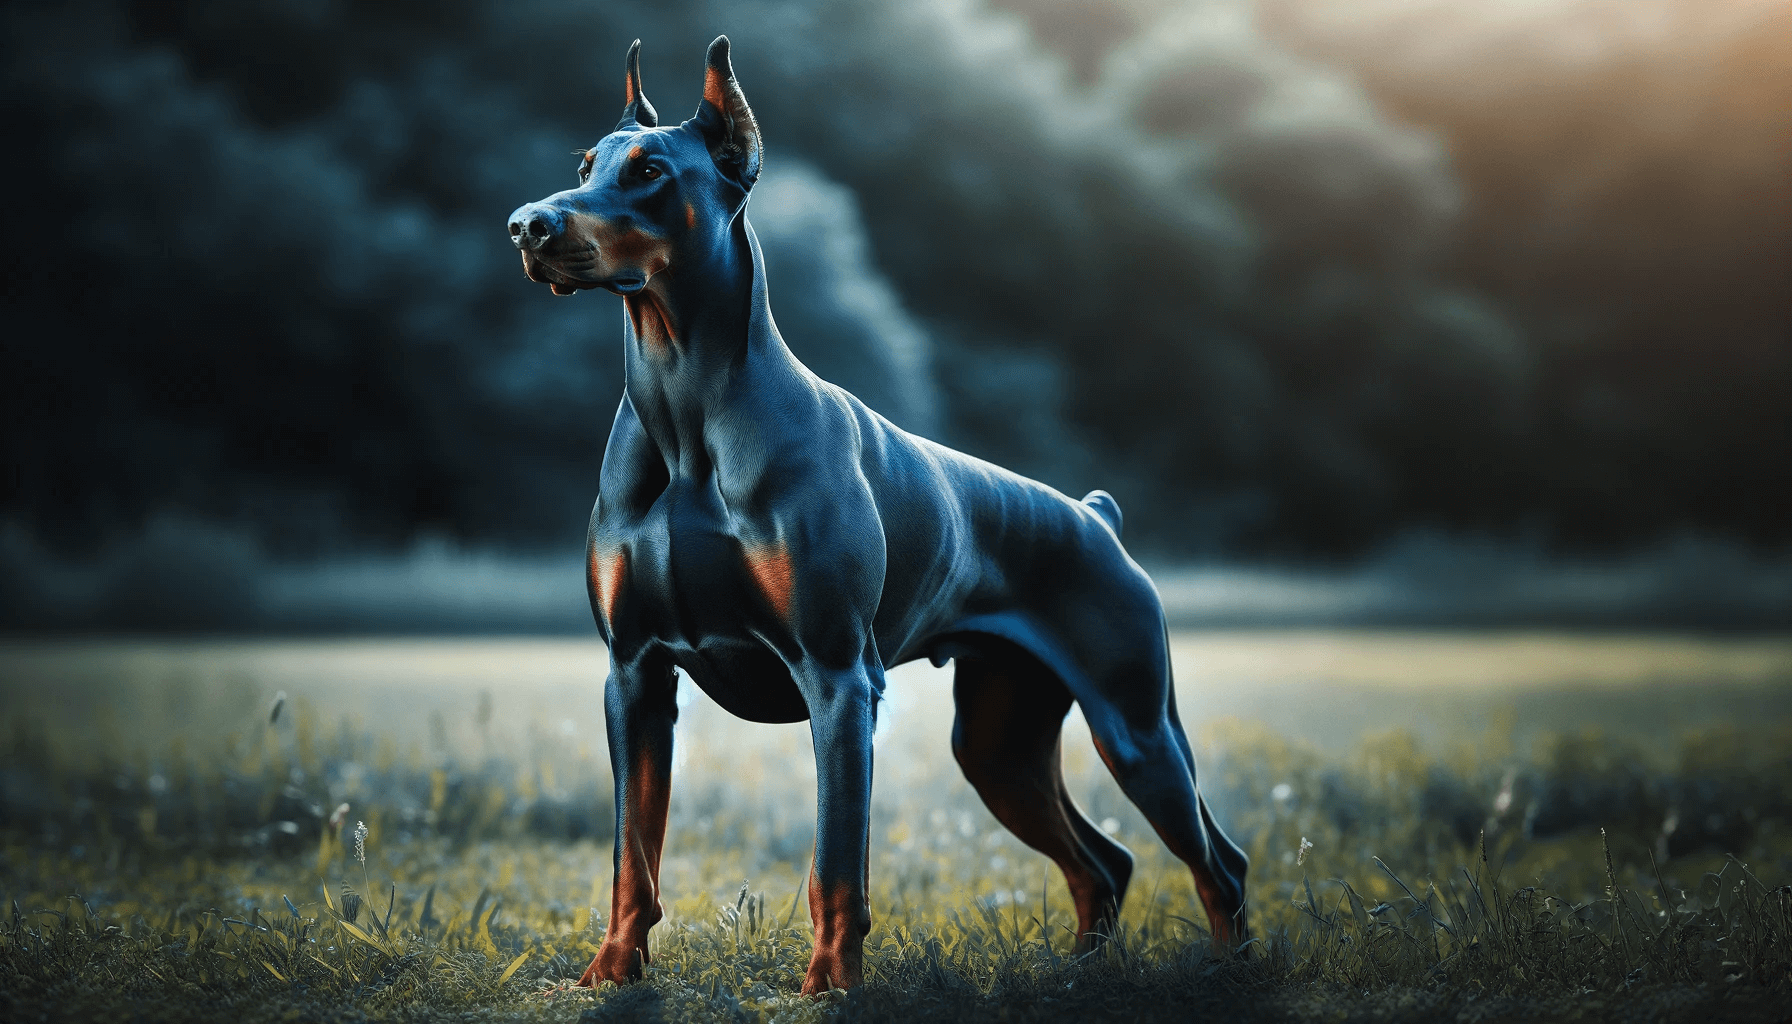 An alert Blue Doberman standing on grass, displaying its alertness and protective nature.